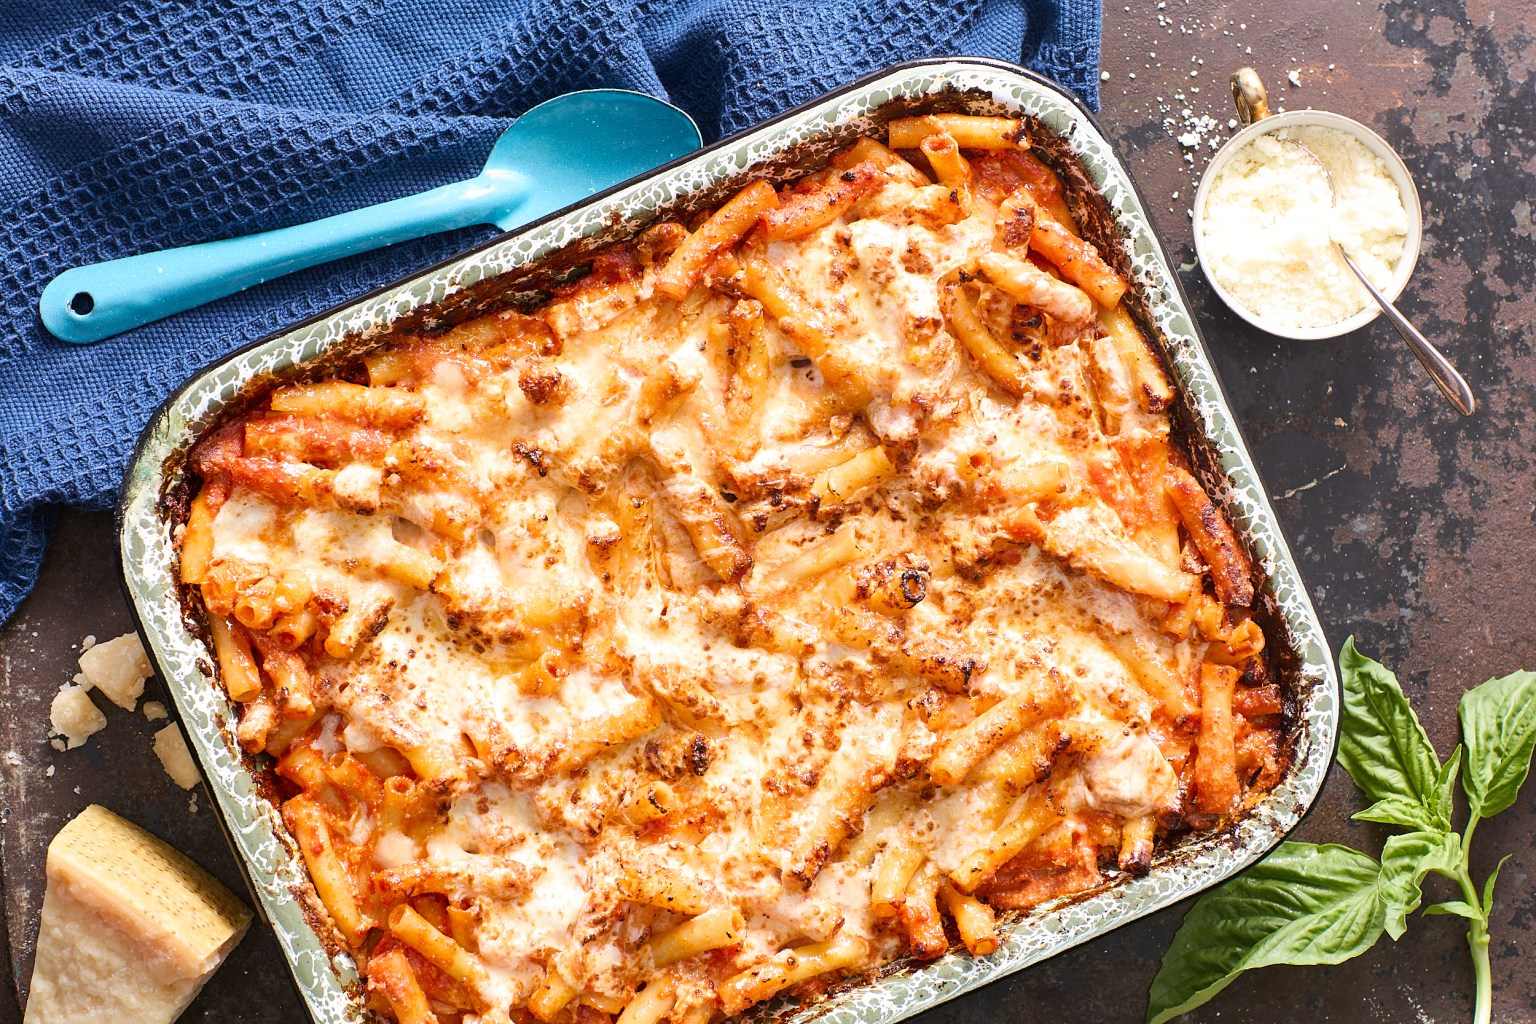 Baked Ziti With Ricotta From Rossella Rago - Appetito